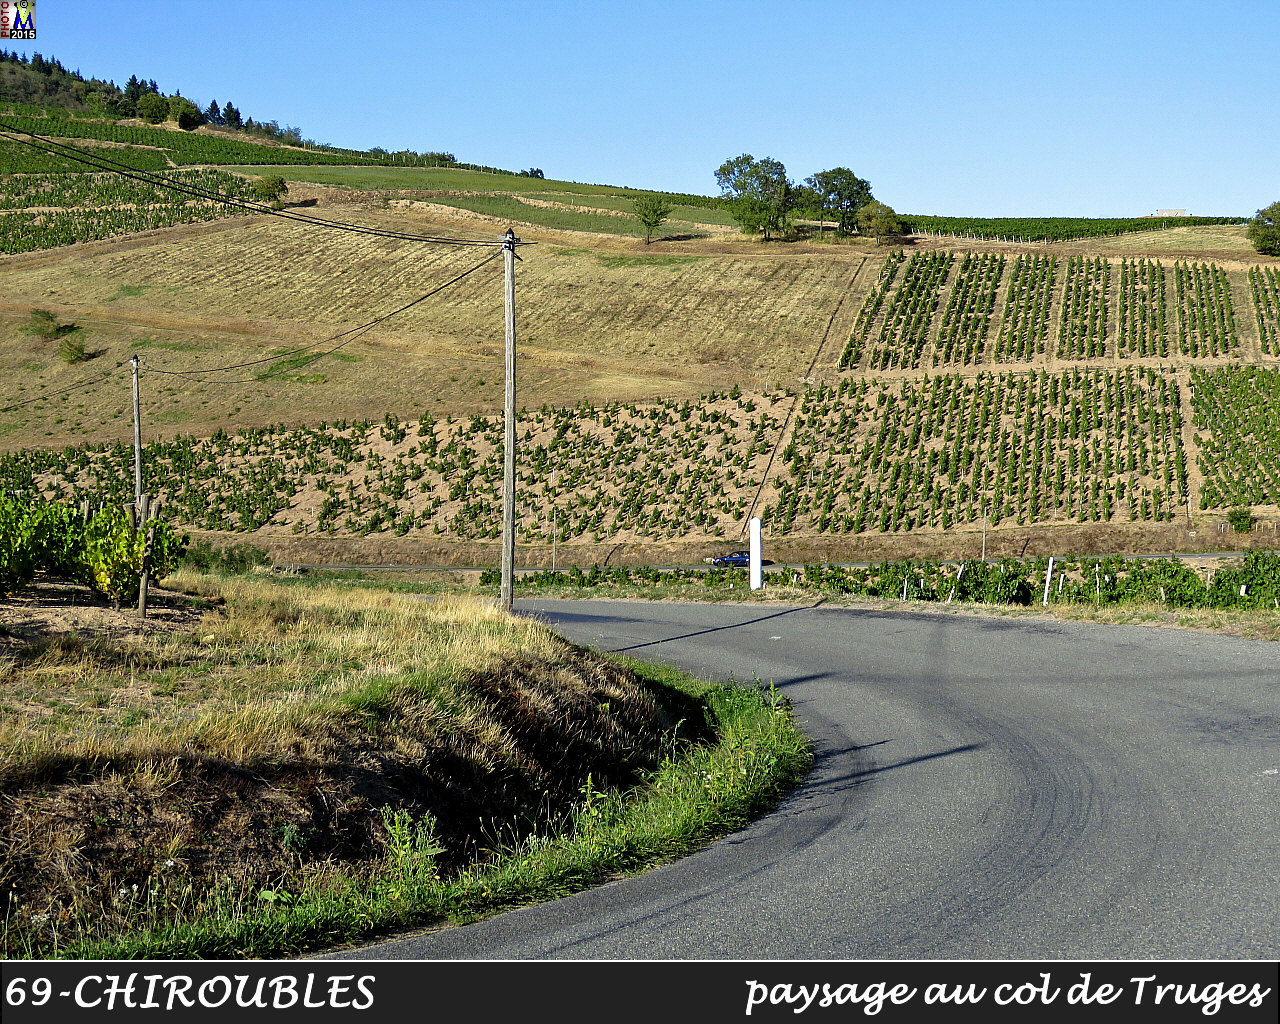 69CHIROUBLES_paysage_112.jpg